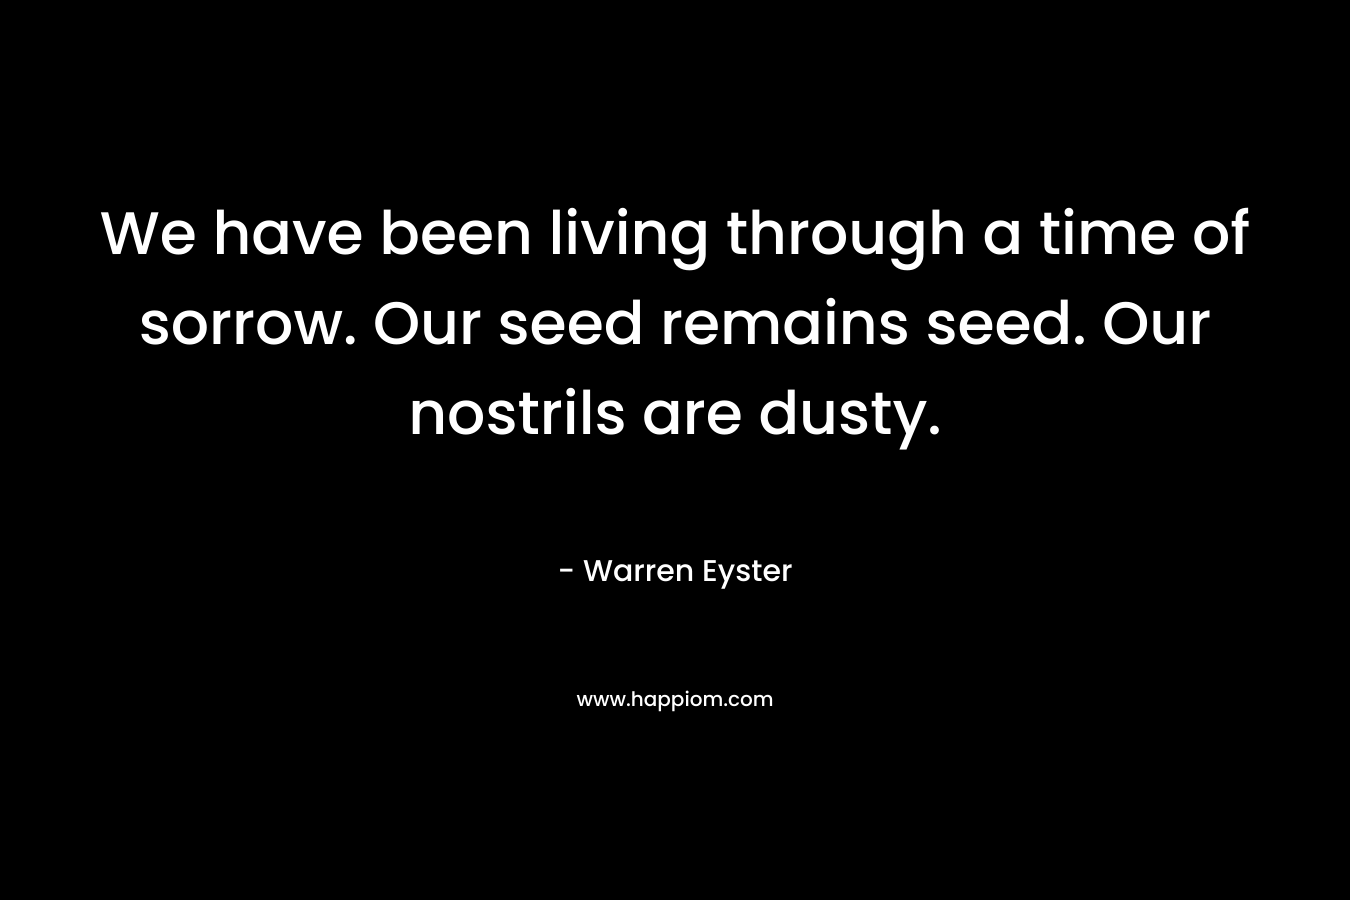 We have been living through a time of sorrow. Our seed remains seed. Our nostrils are dusty.